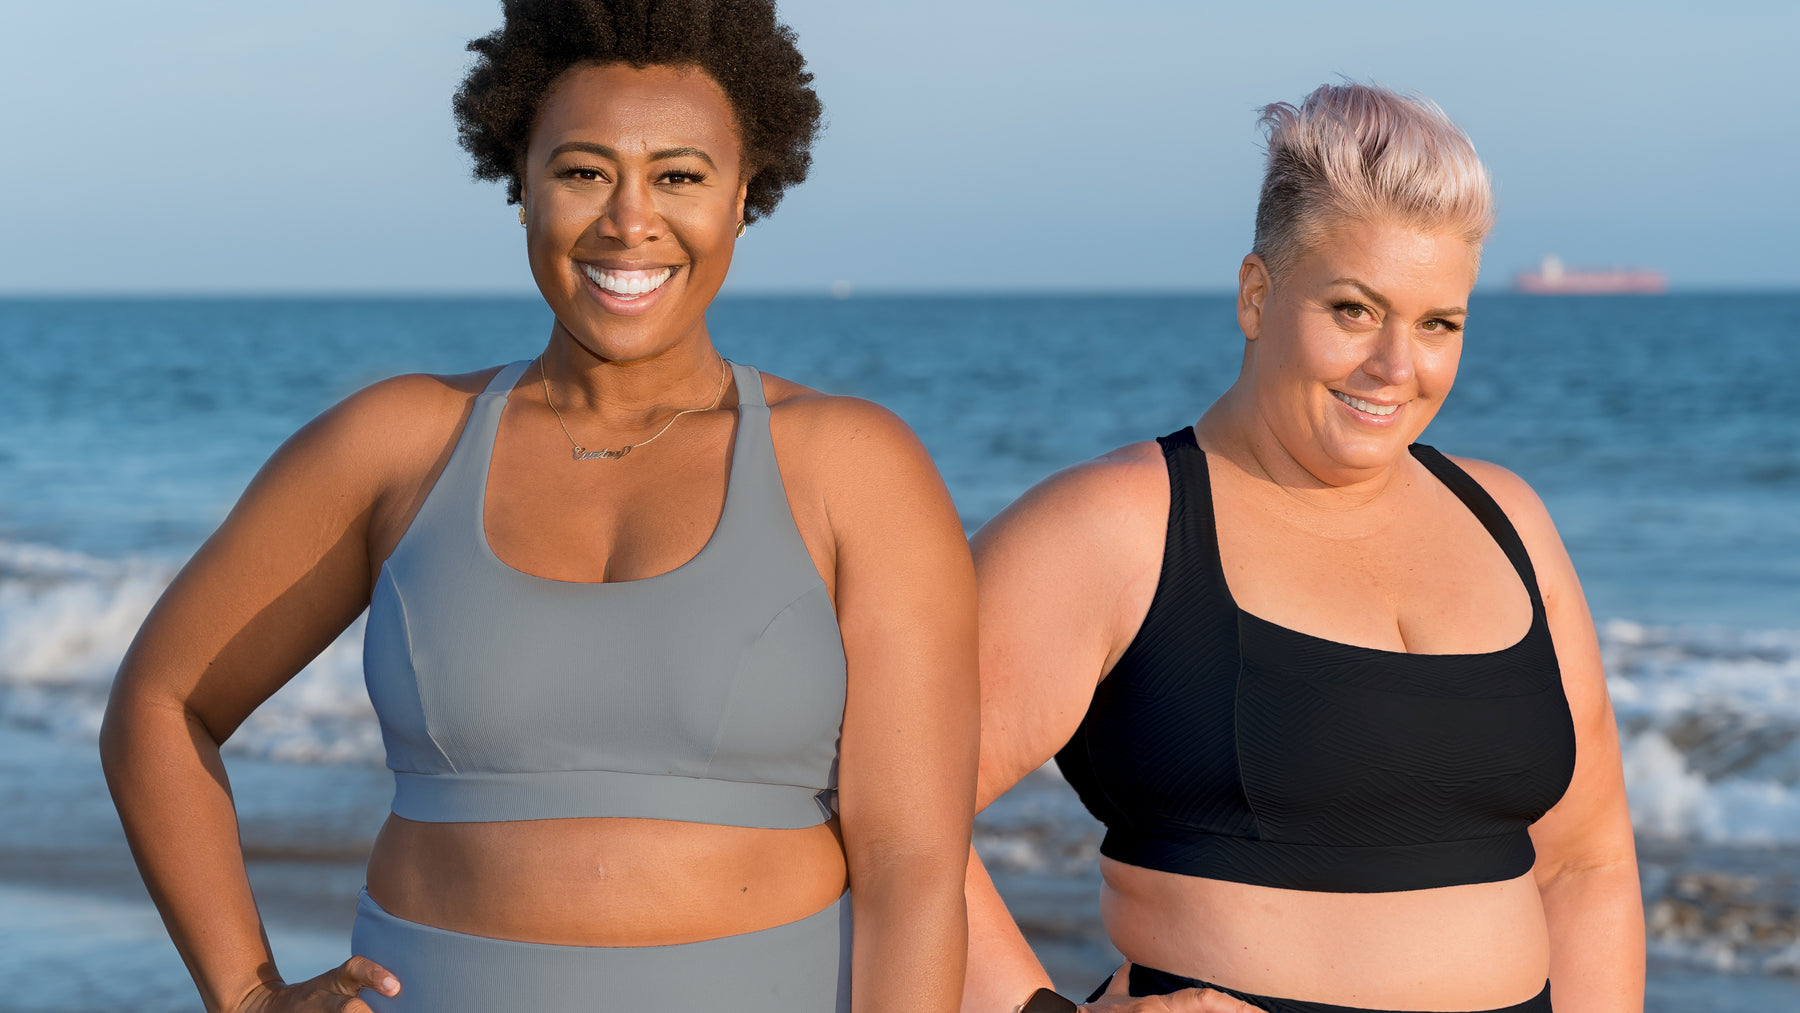 Step Aside Lululemon – Lola Getts is here for the Curvy Woman